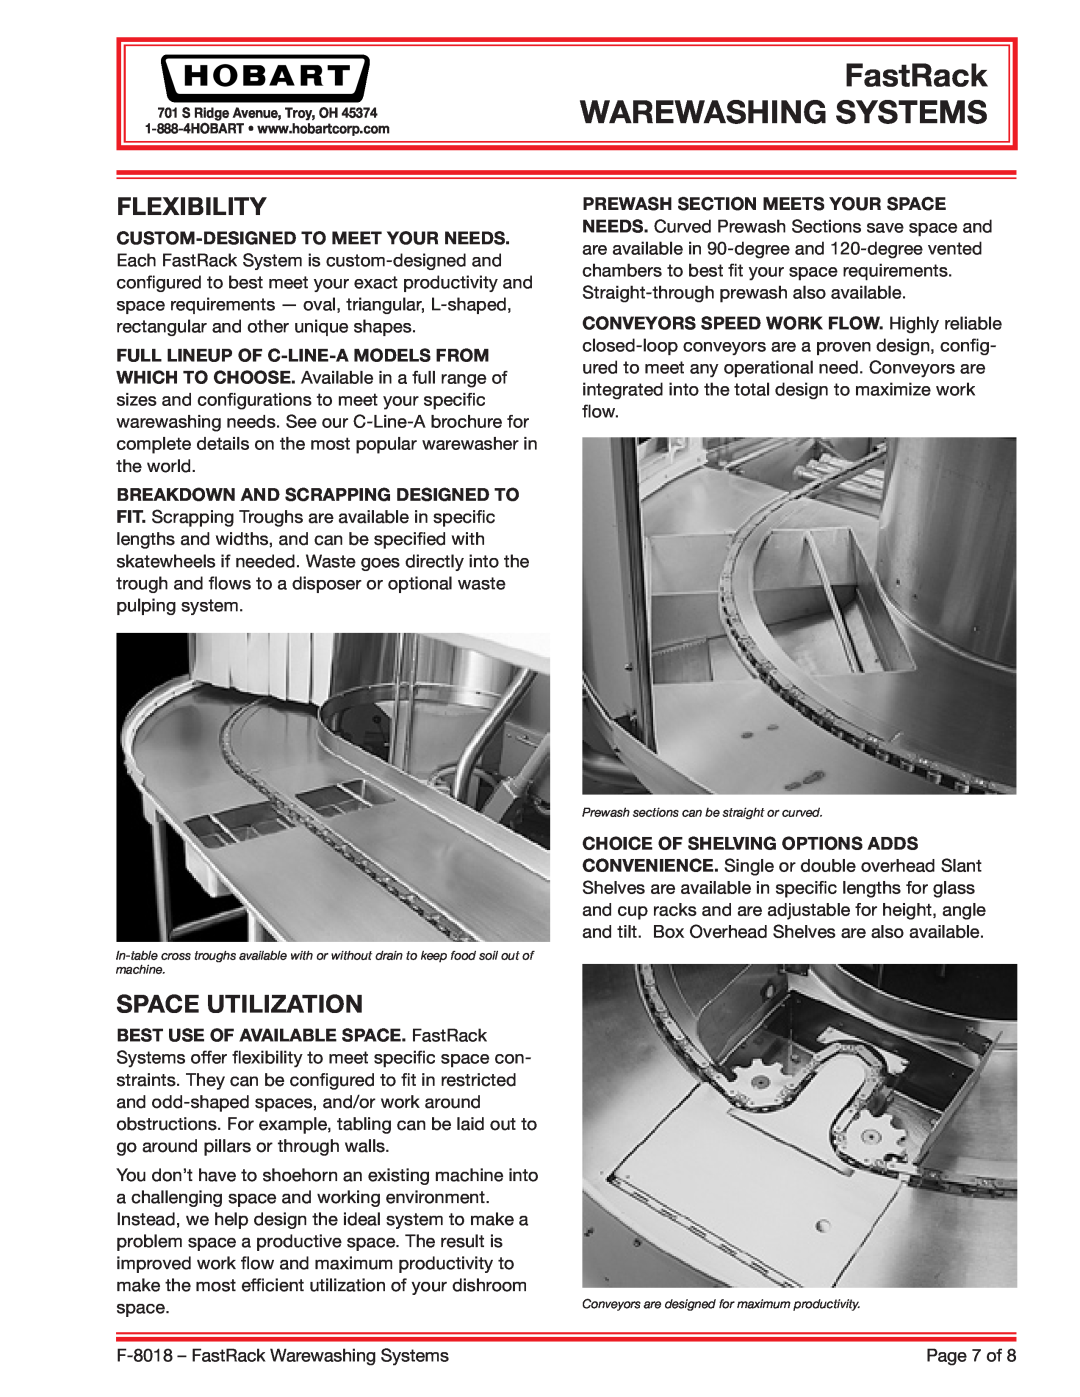 Hobart Flexibility, Space Utilization, FastRack WAREWASHING SYSTEMS, F-8018- FastRack Warewashing Systems, Page 7 of 